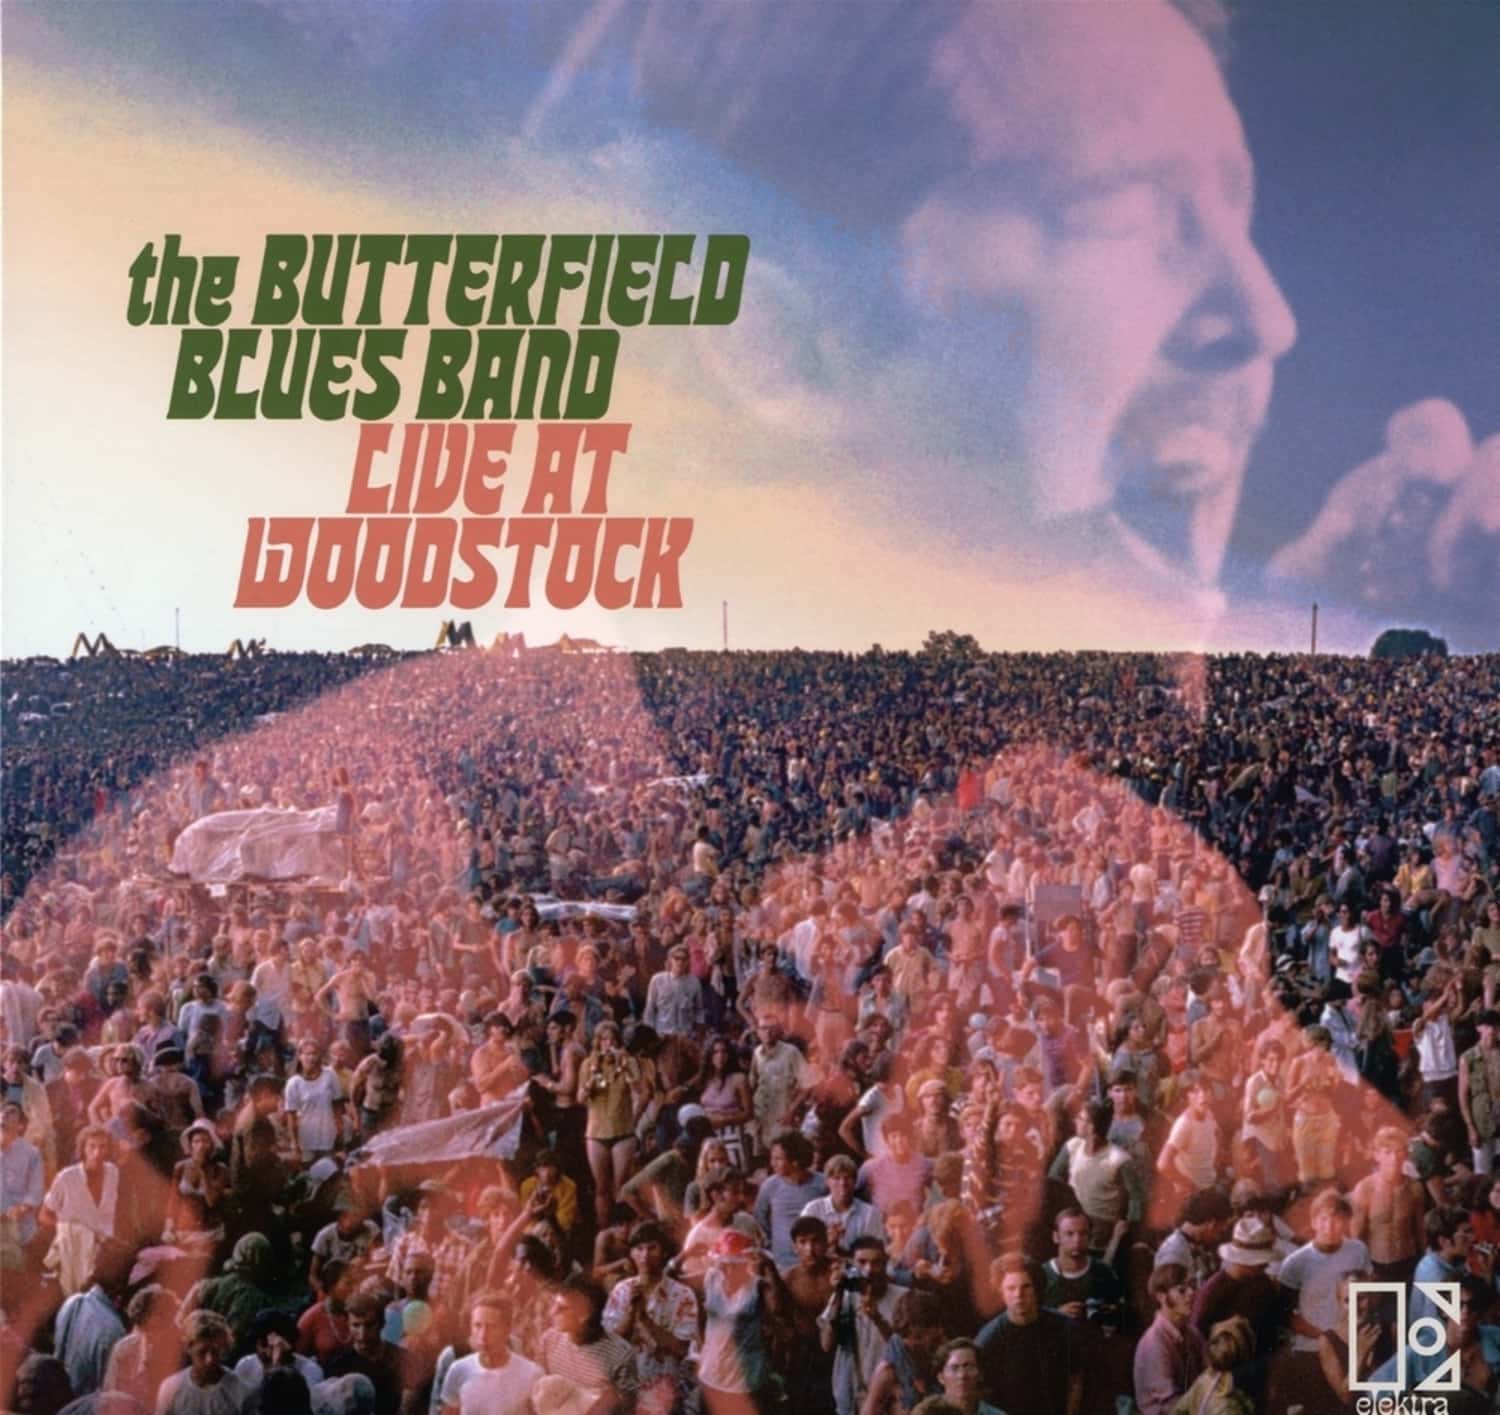 Paul Butterfield Blues Band - LIVE AT WOODSTOCK 